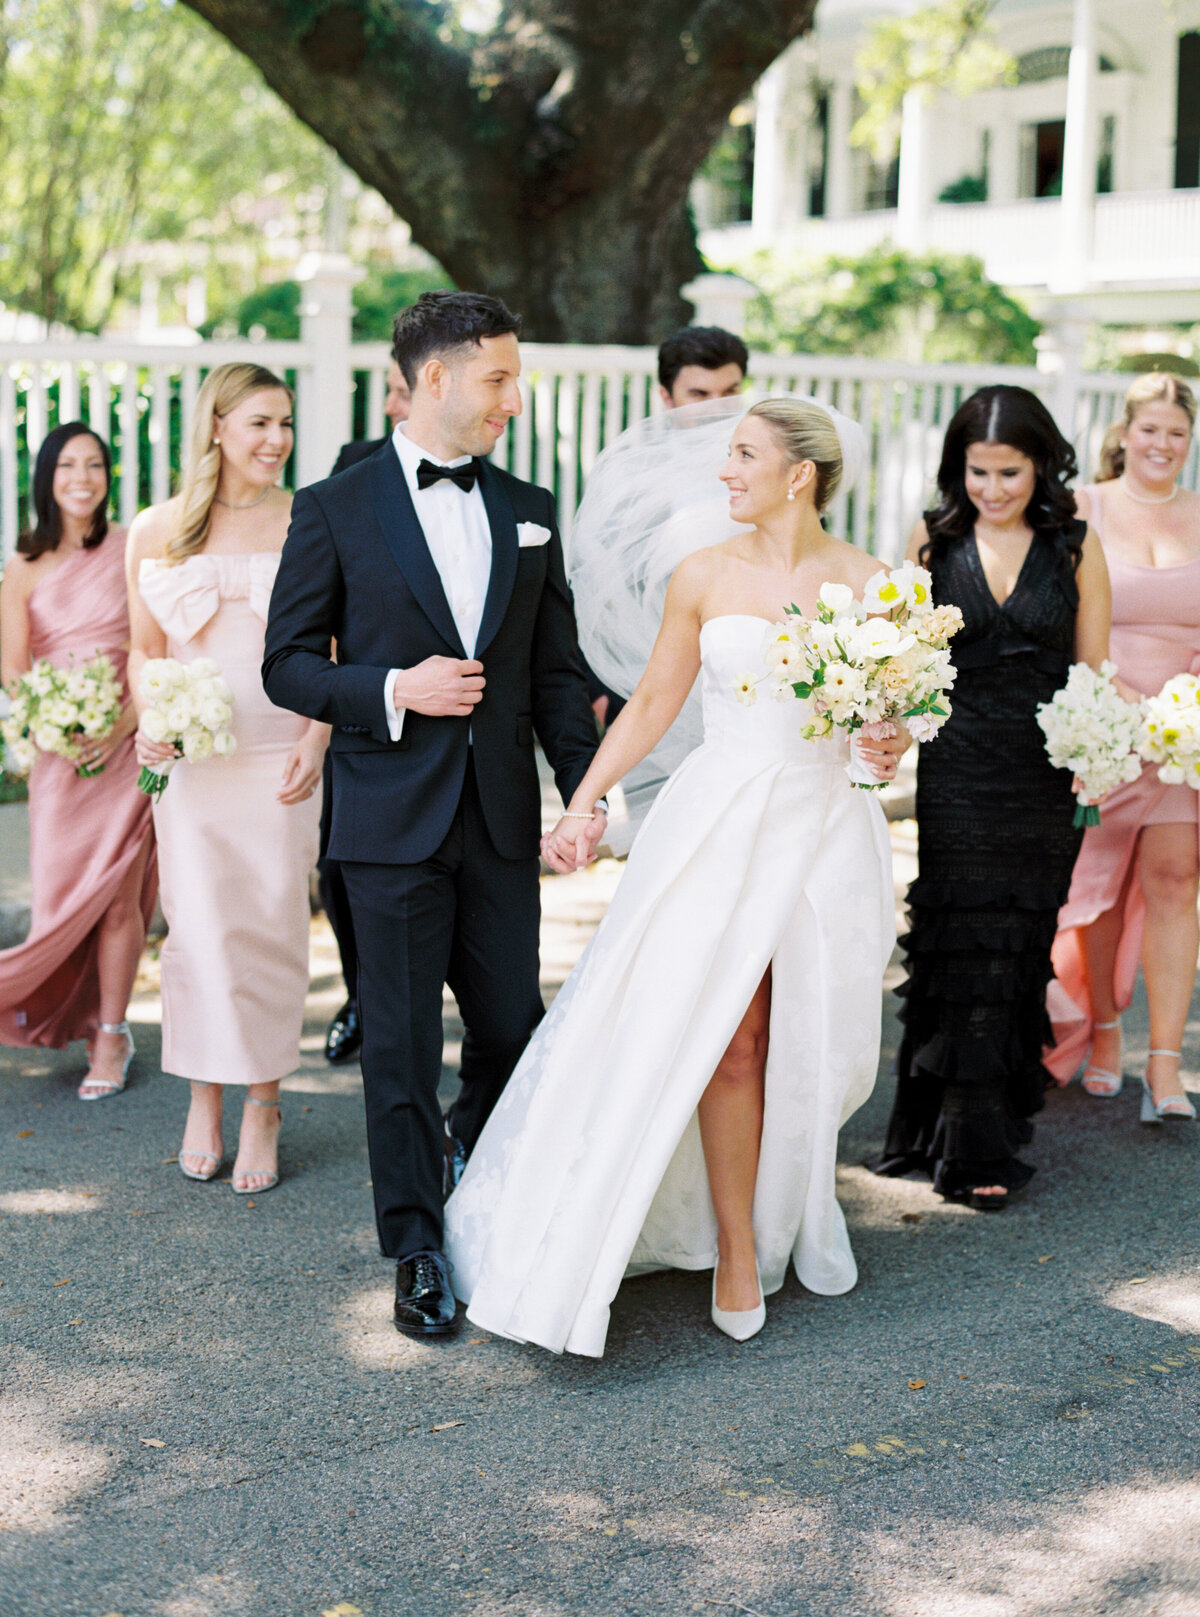 Bride and groom walking with the bridal party. Bridesmaids in pink dresses.